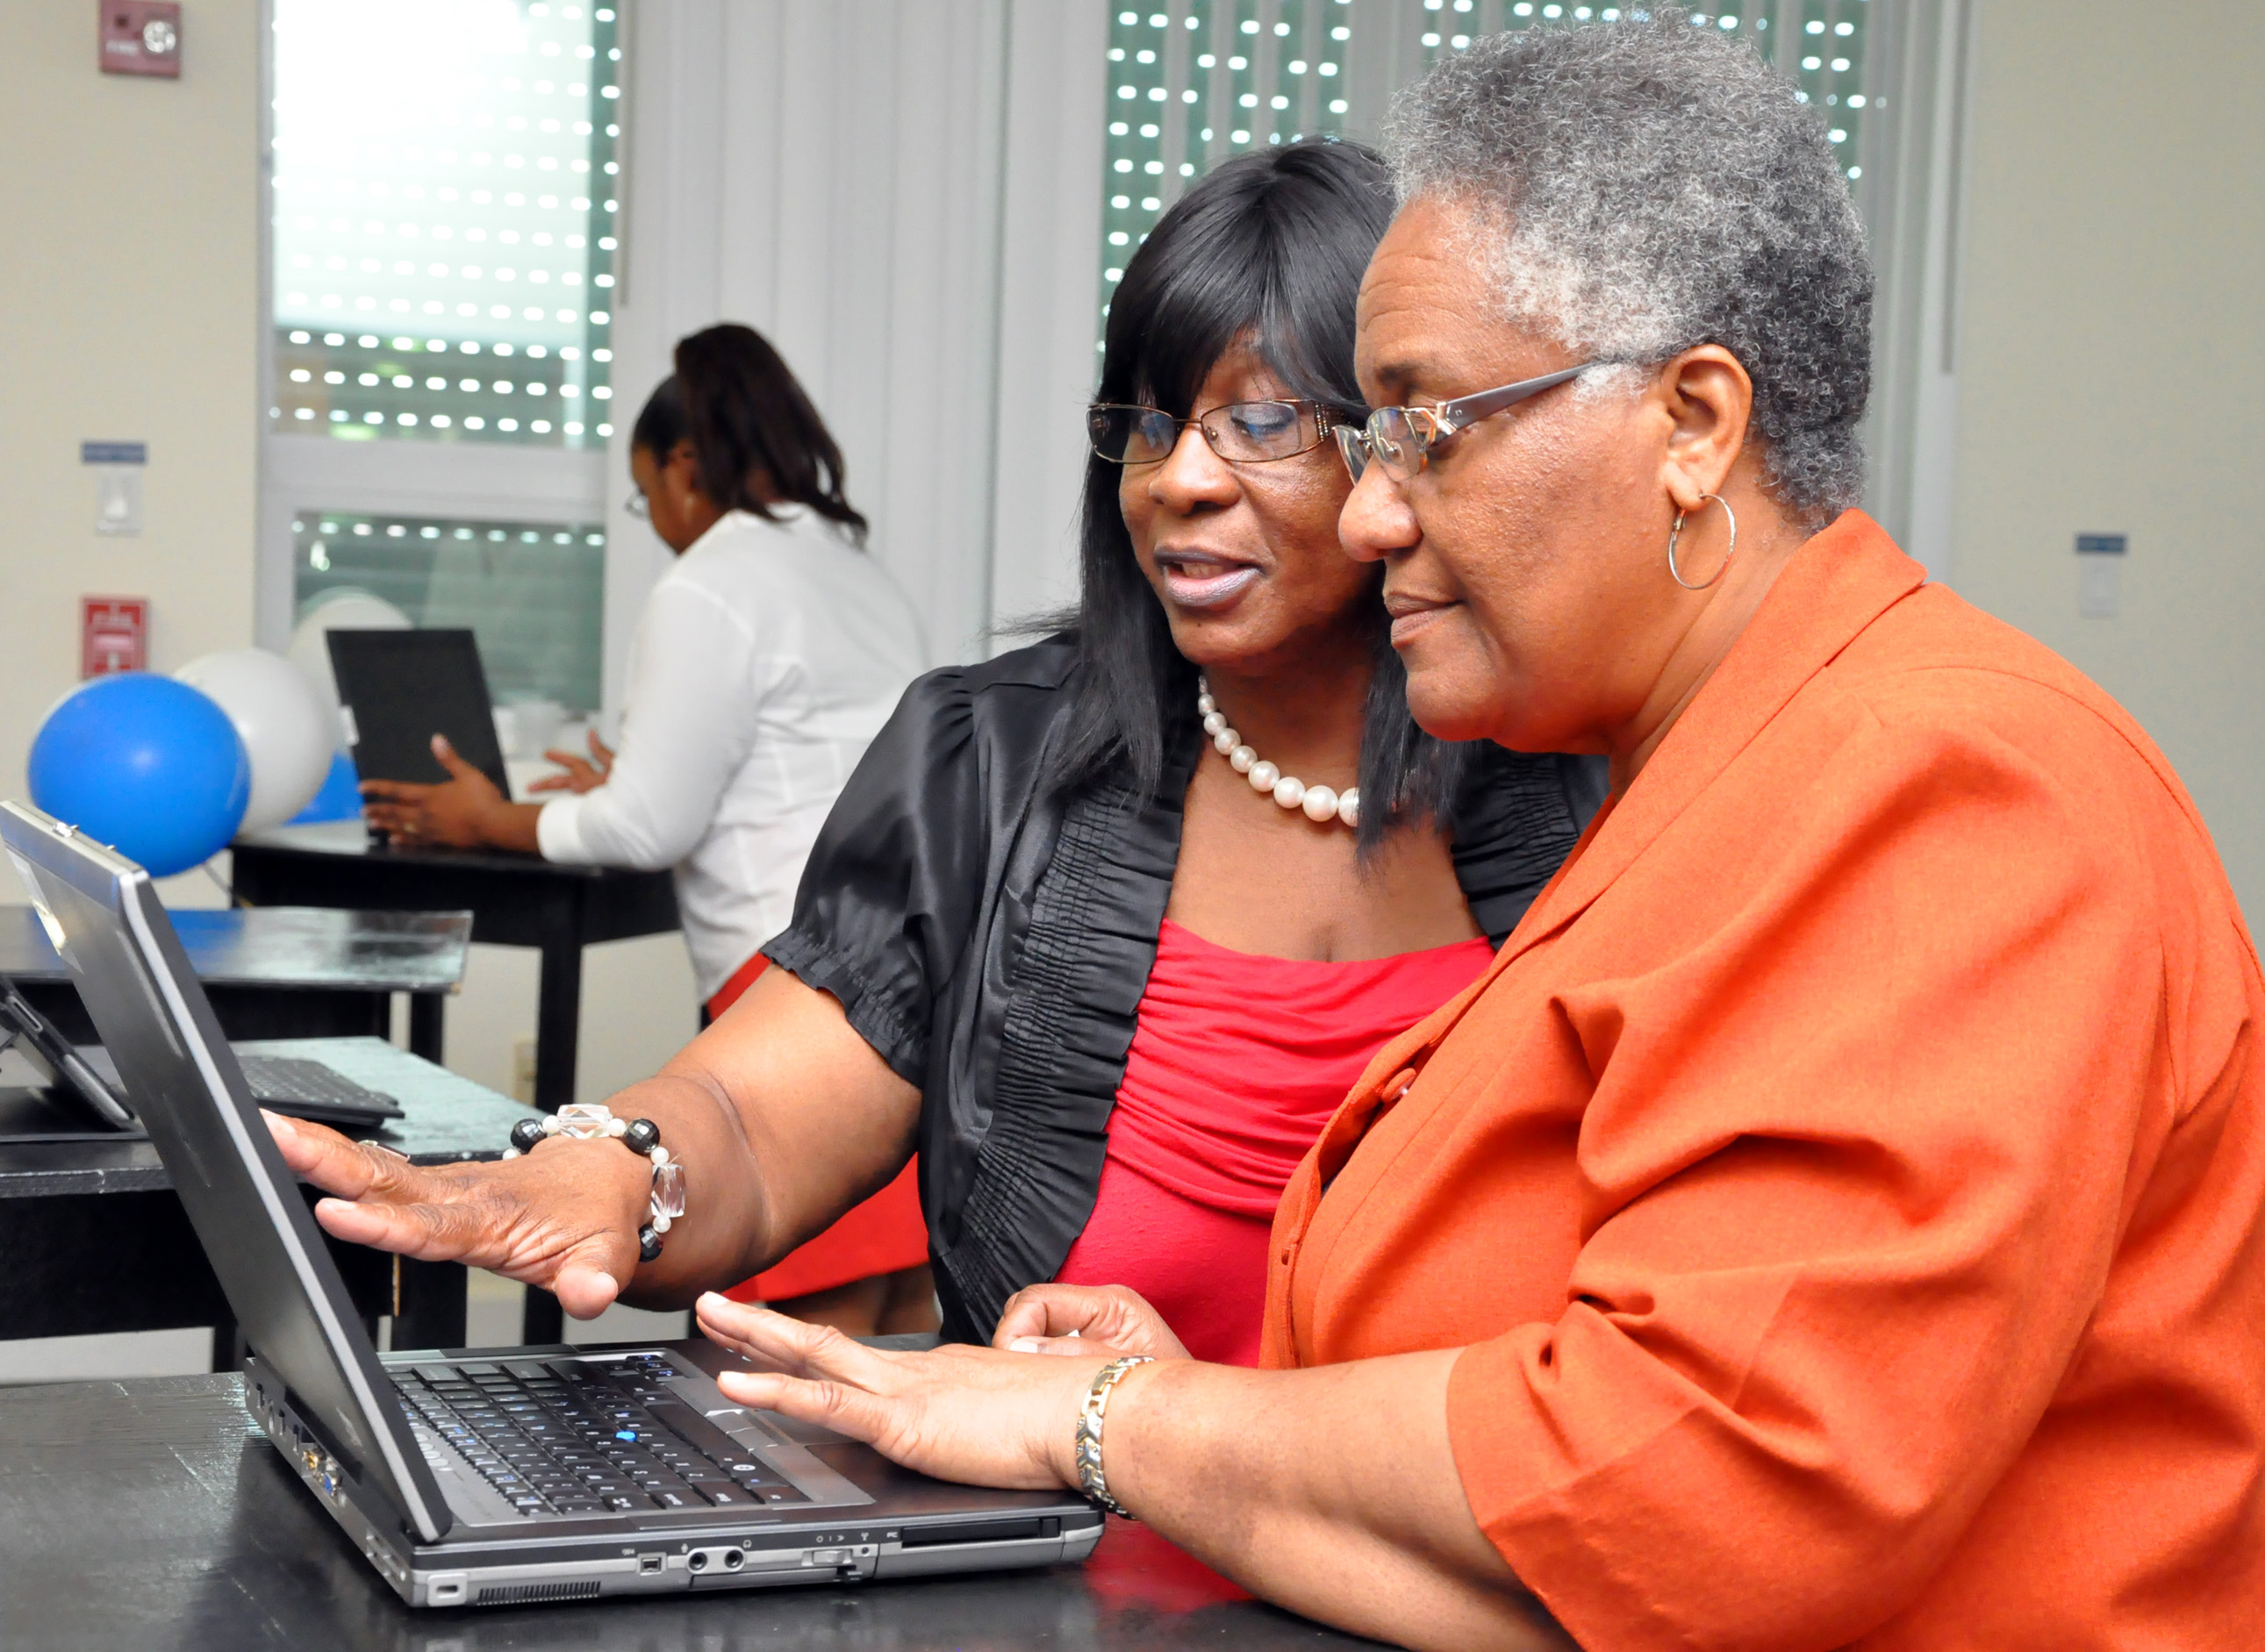 UVI Administrative Assistant Lois Rivera shares the university’s new Web site with her colleague, Marlene Thomas, at UVI’s Web site launch presentation.